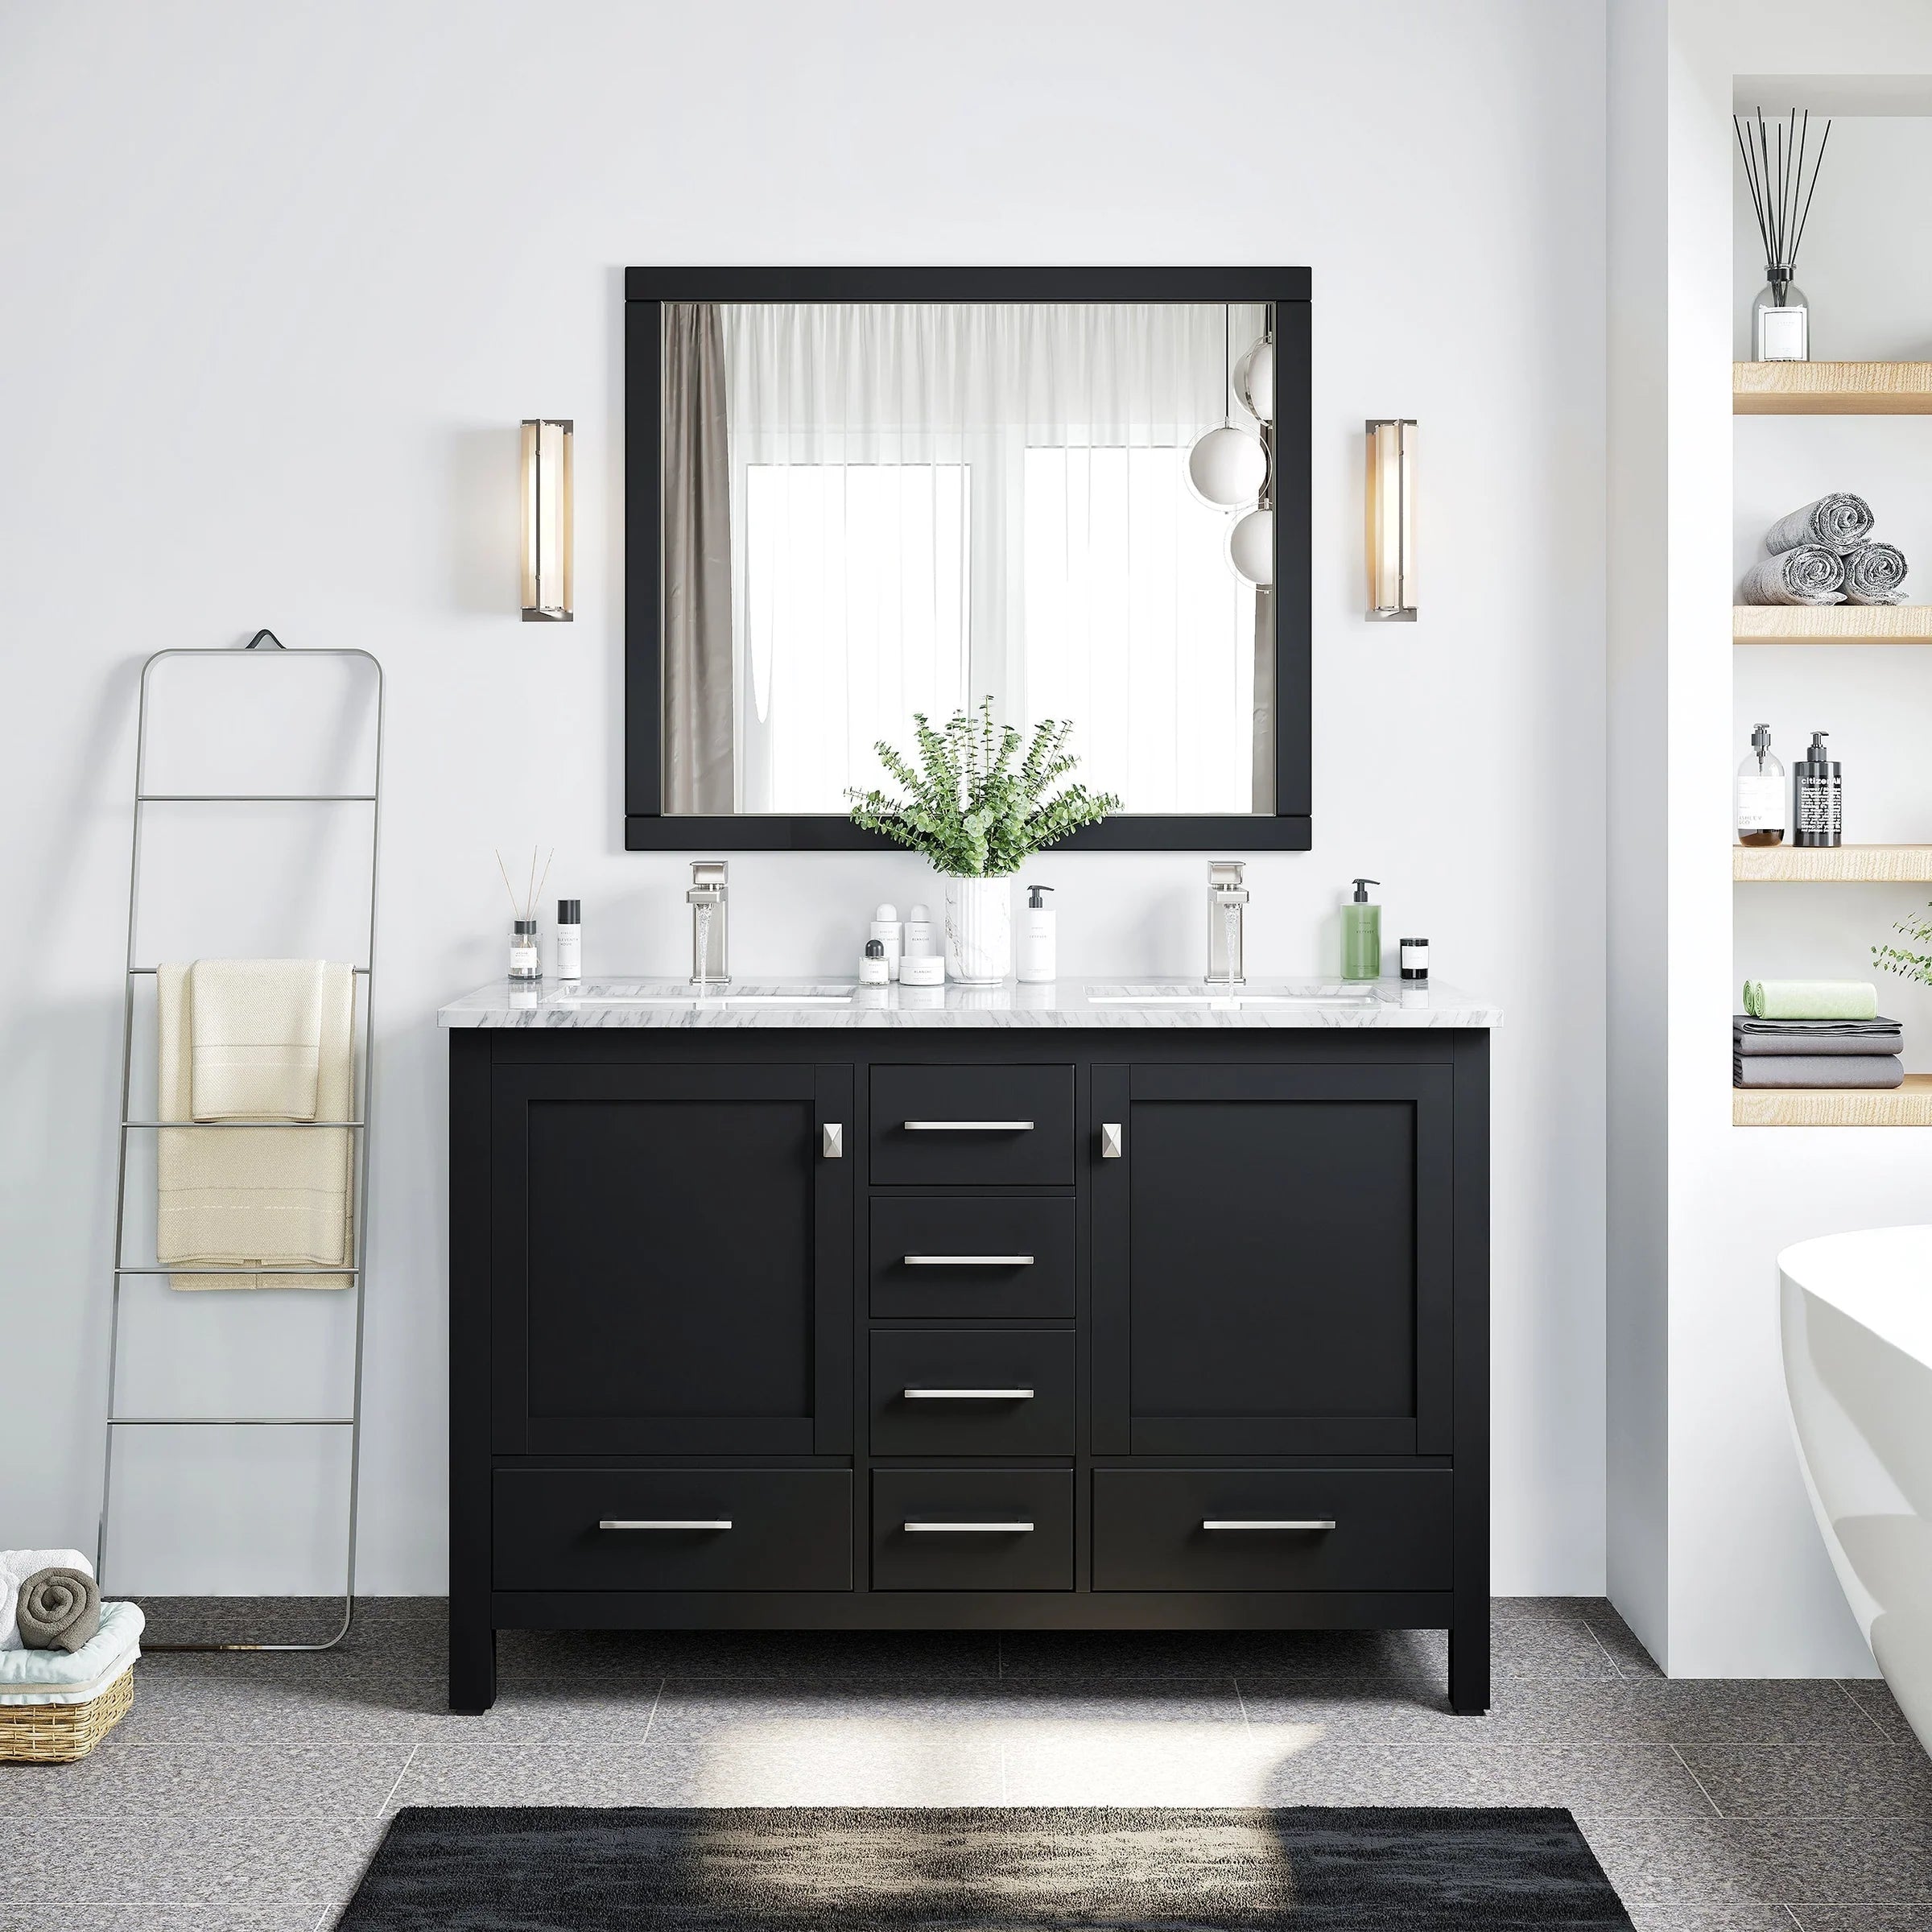 Eviva London Espresso/ Gray/ White Transitional Double Sink Bathroom Vanity with White Carrara Marble Countertop and Undermount Porcelain Sinks